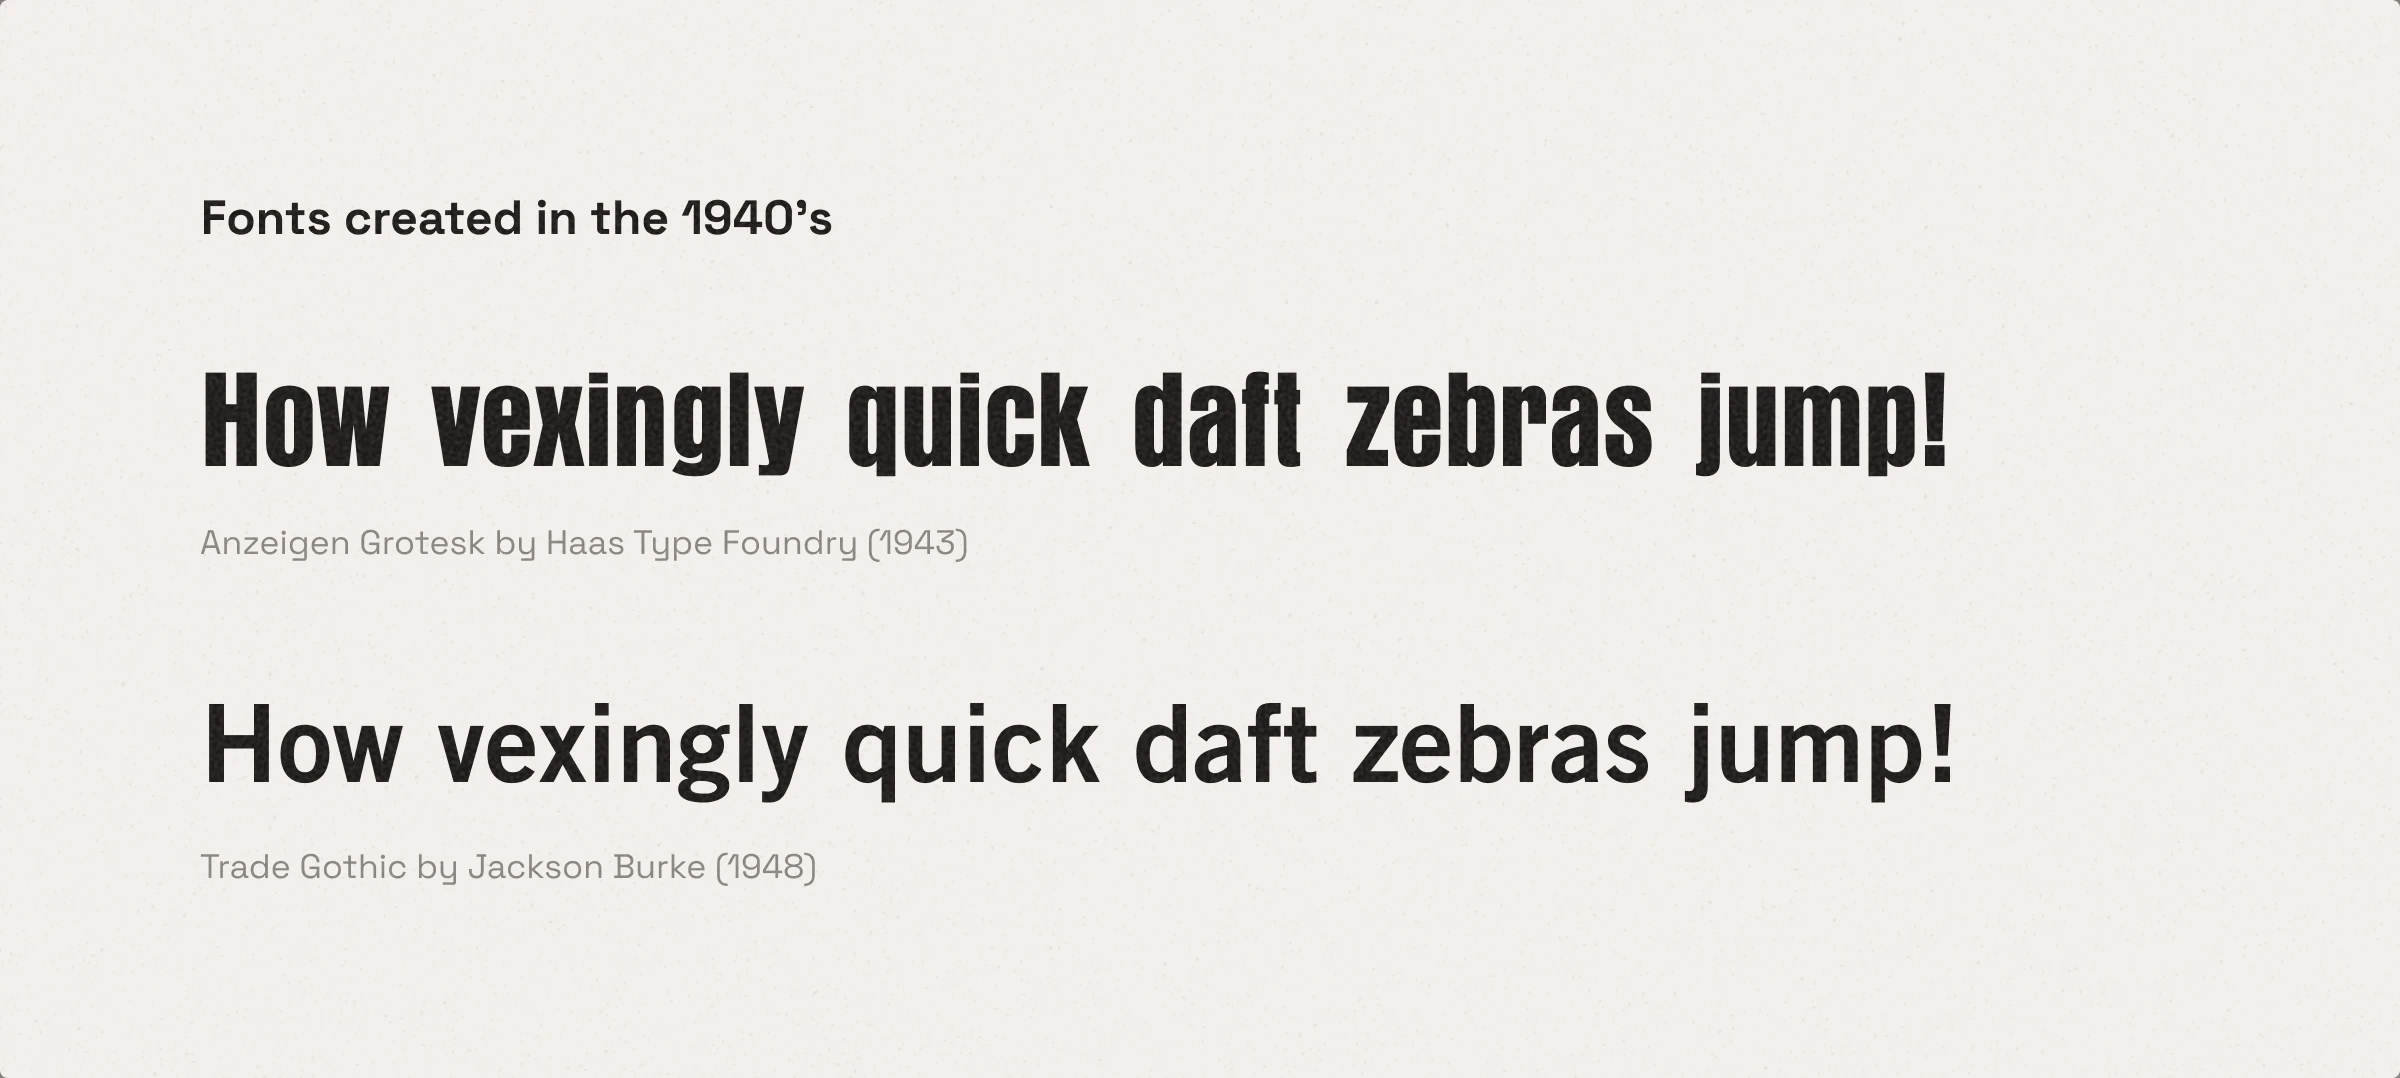 Fonts created in the 1940’s